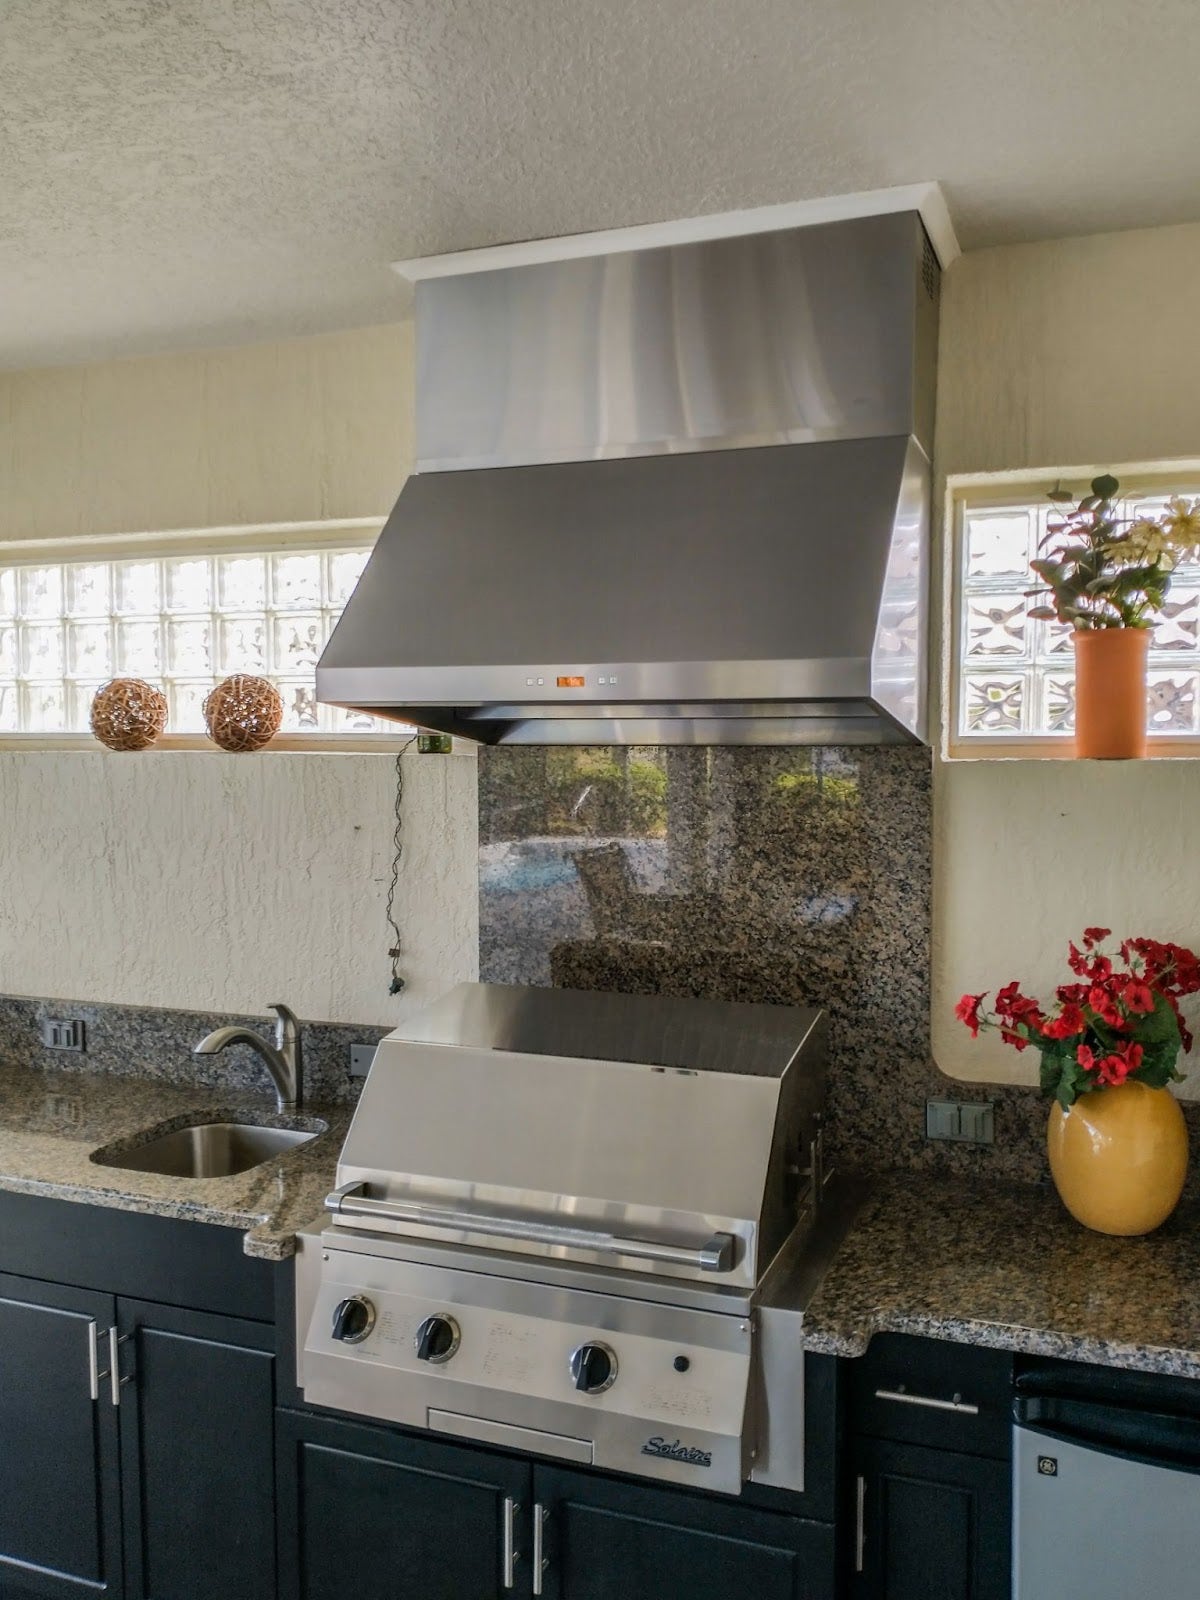 Cozy fun outdoor kitchen featuring a Proline wall range hood above a stove, framed by granite counters and decorative plants, with natural light from a glass block window - prolinerangehoods.com